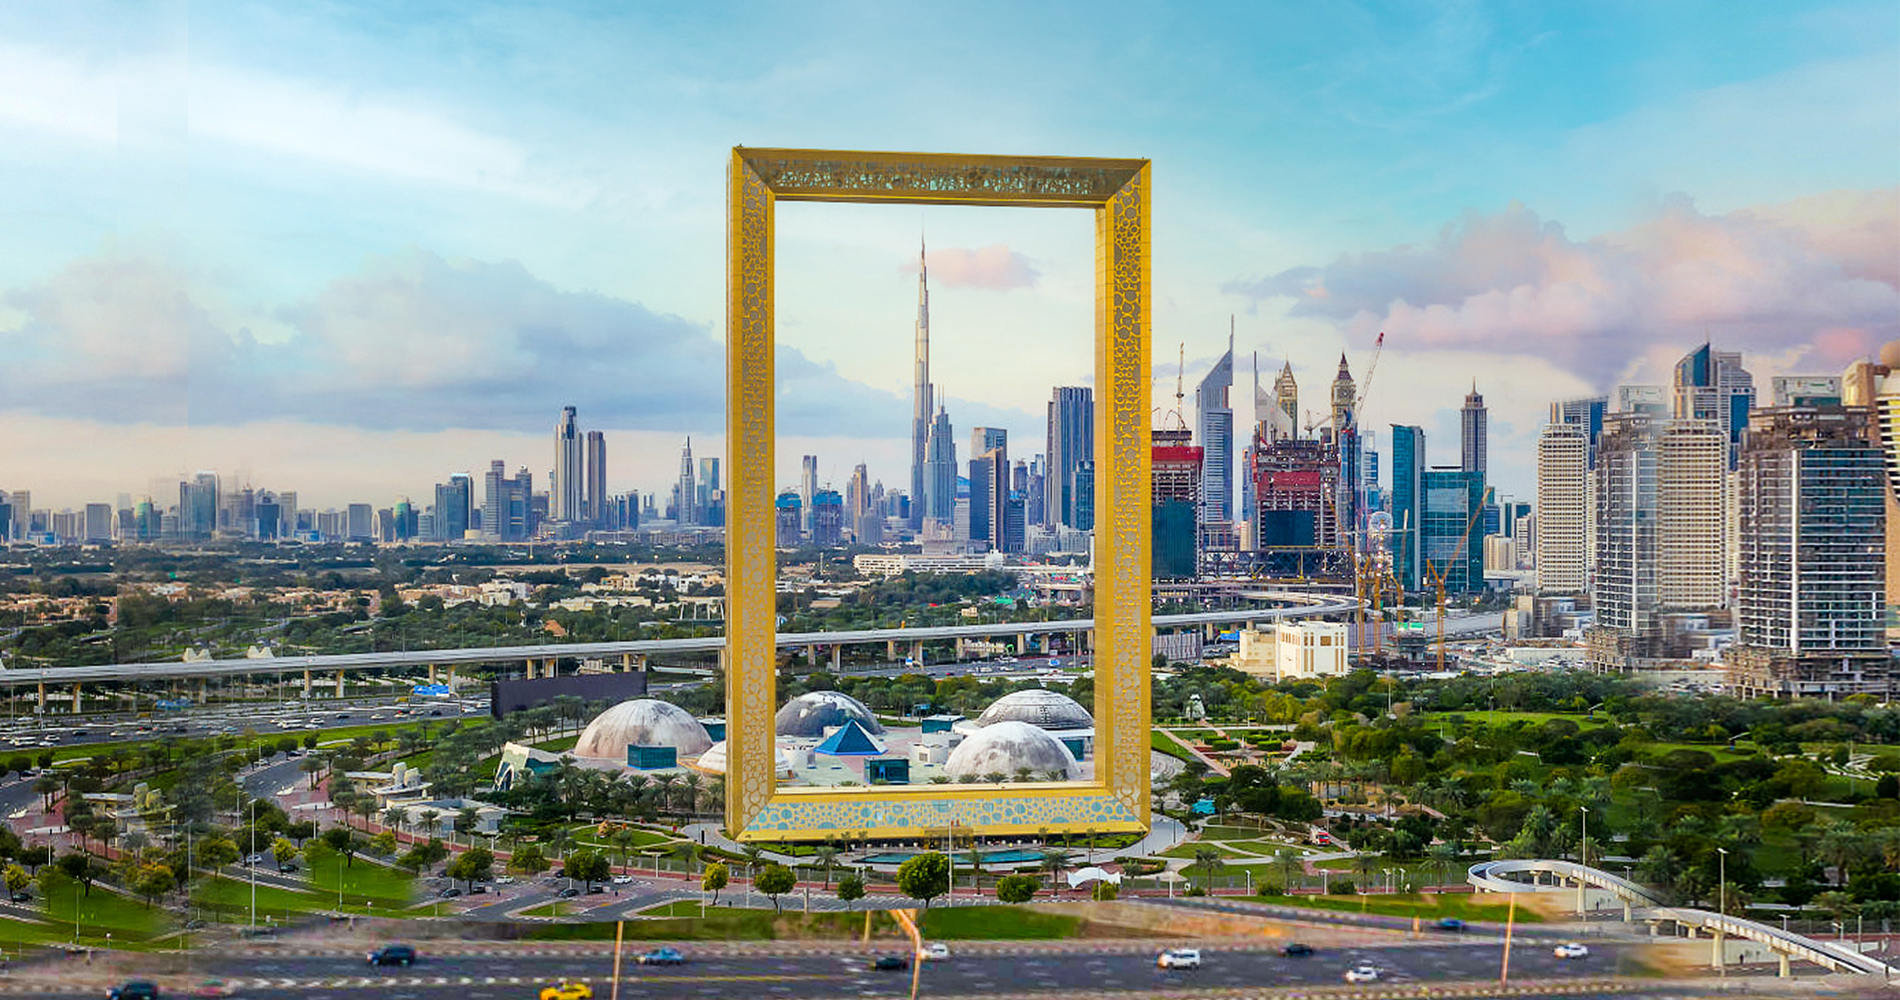 Dubai Summer Surprises Continues with Lots of Entertainment, Exhibitions, and Sports Activities in Dubai This September 2021